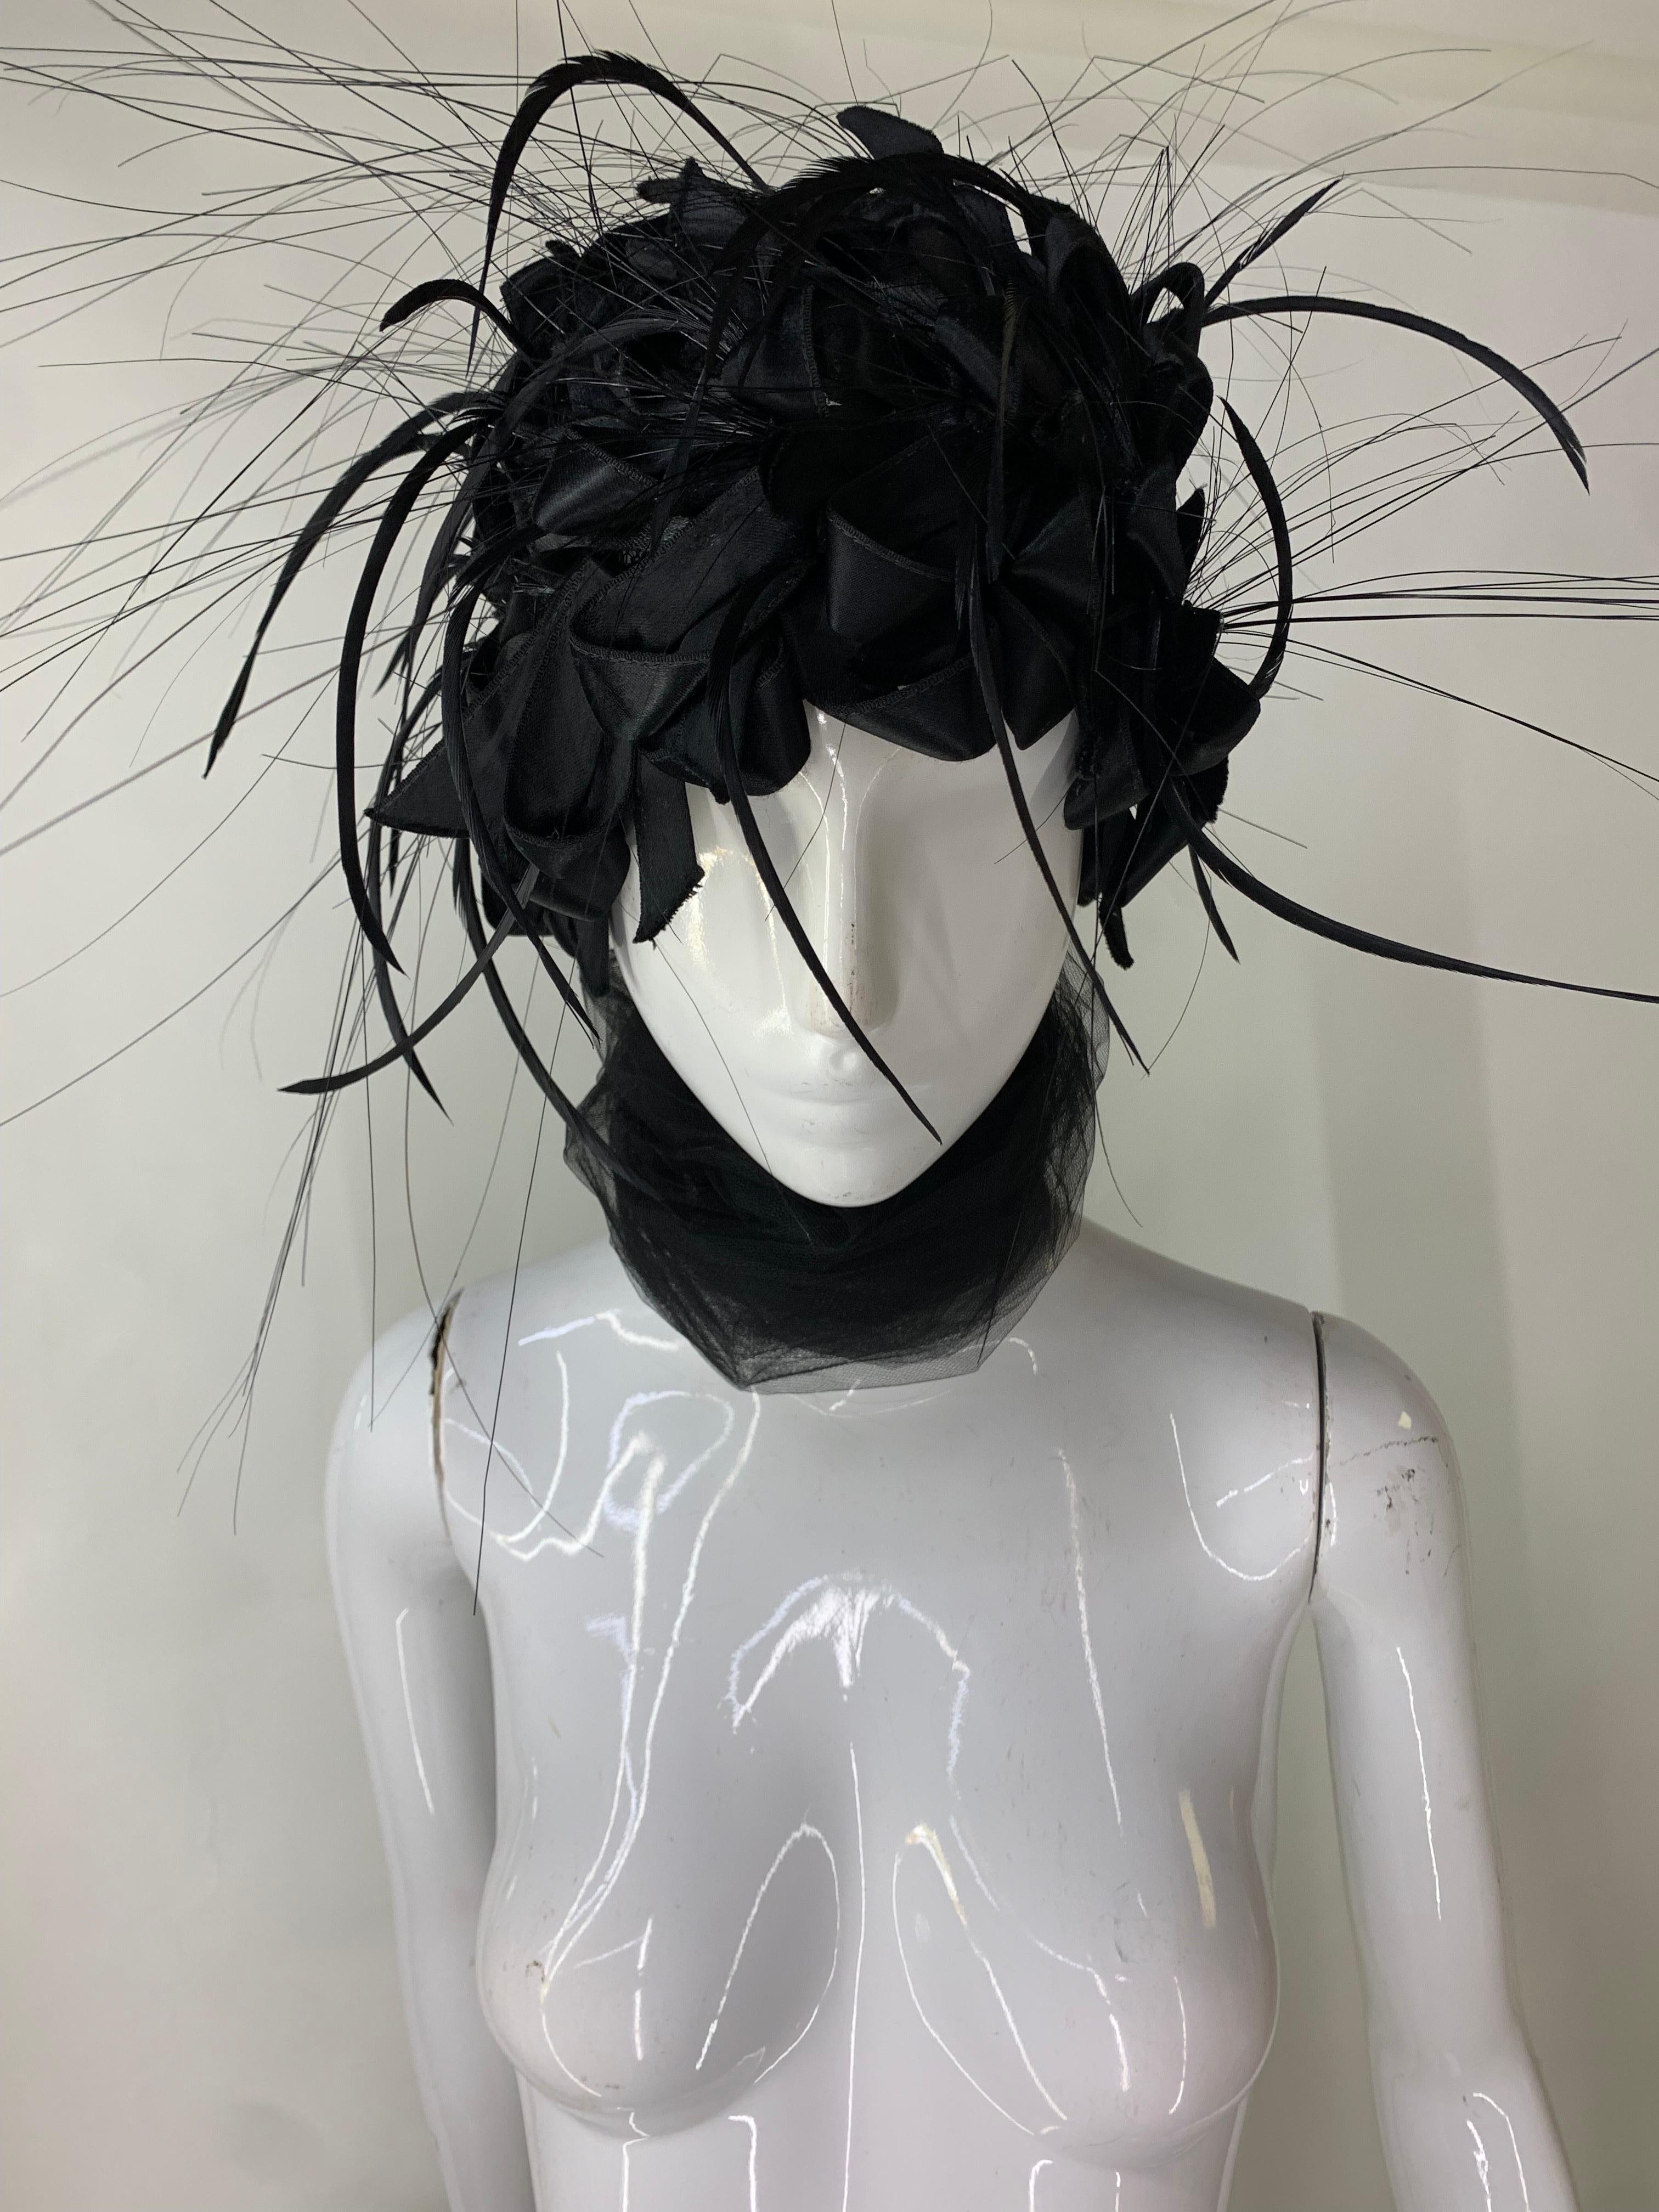 1960s Christian Dior Black Silk Ribbon and Feather Turban w Attached Tulle Scarf:  Lined in black tulle, this turban is a softer construction, not stiff at all. Ribbon loops and feather wisps adorn the hat. An attached silk tulle scarf can be styled